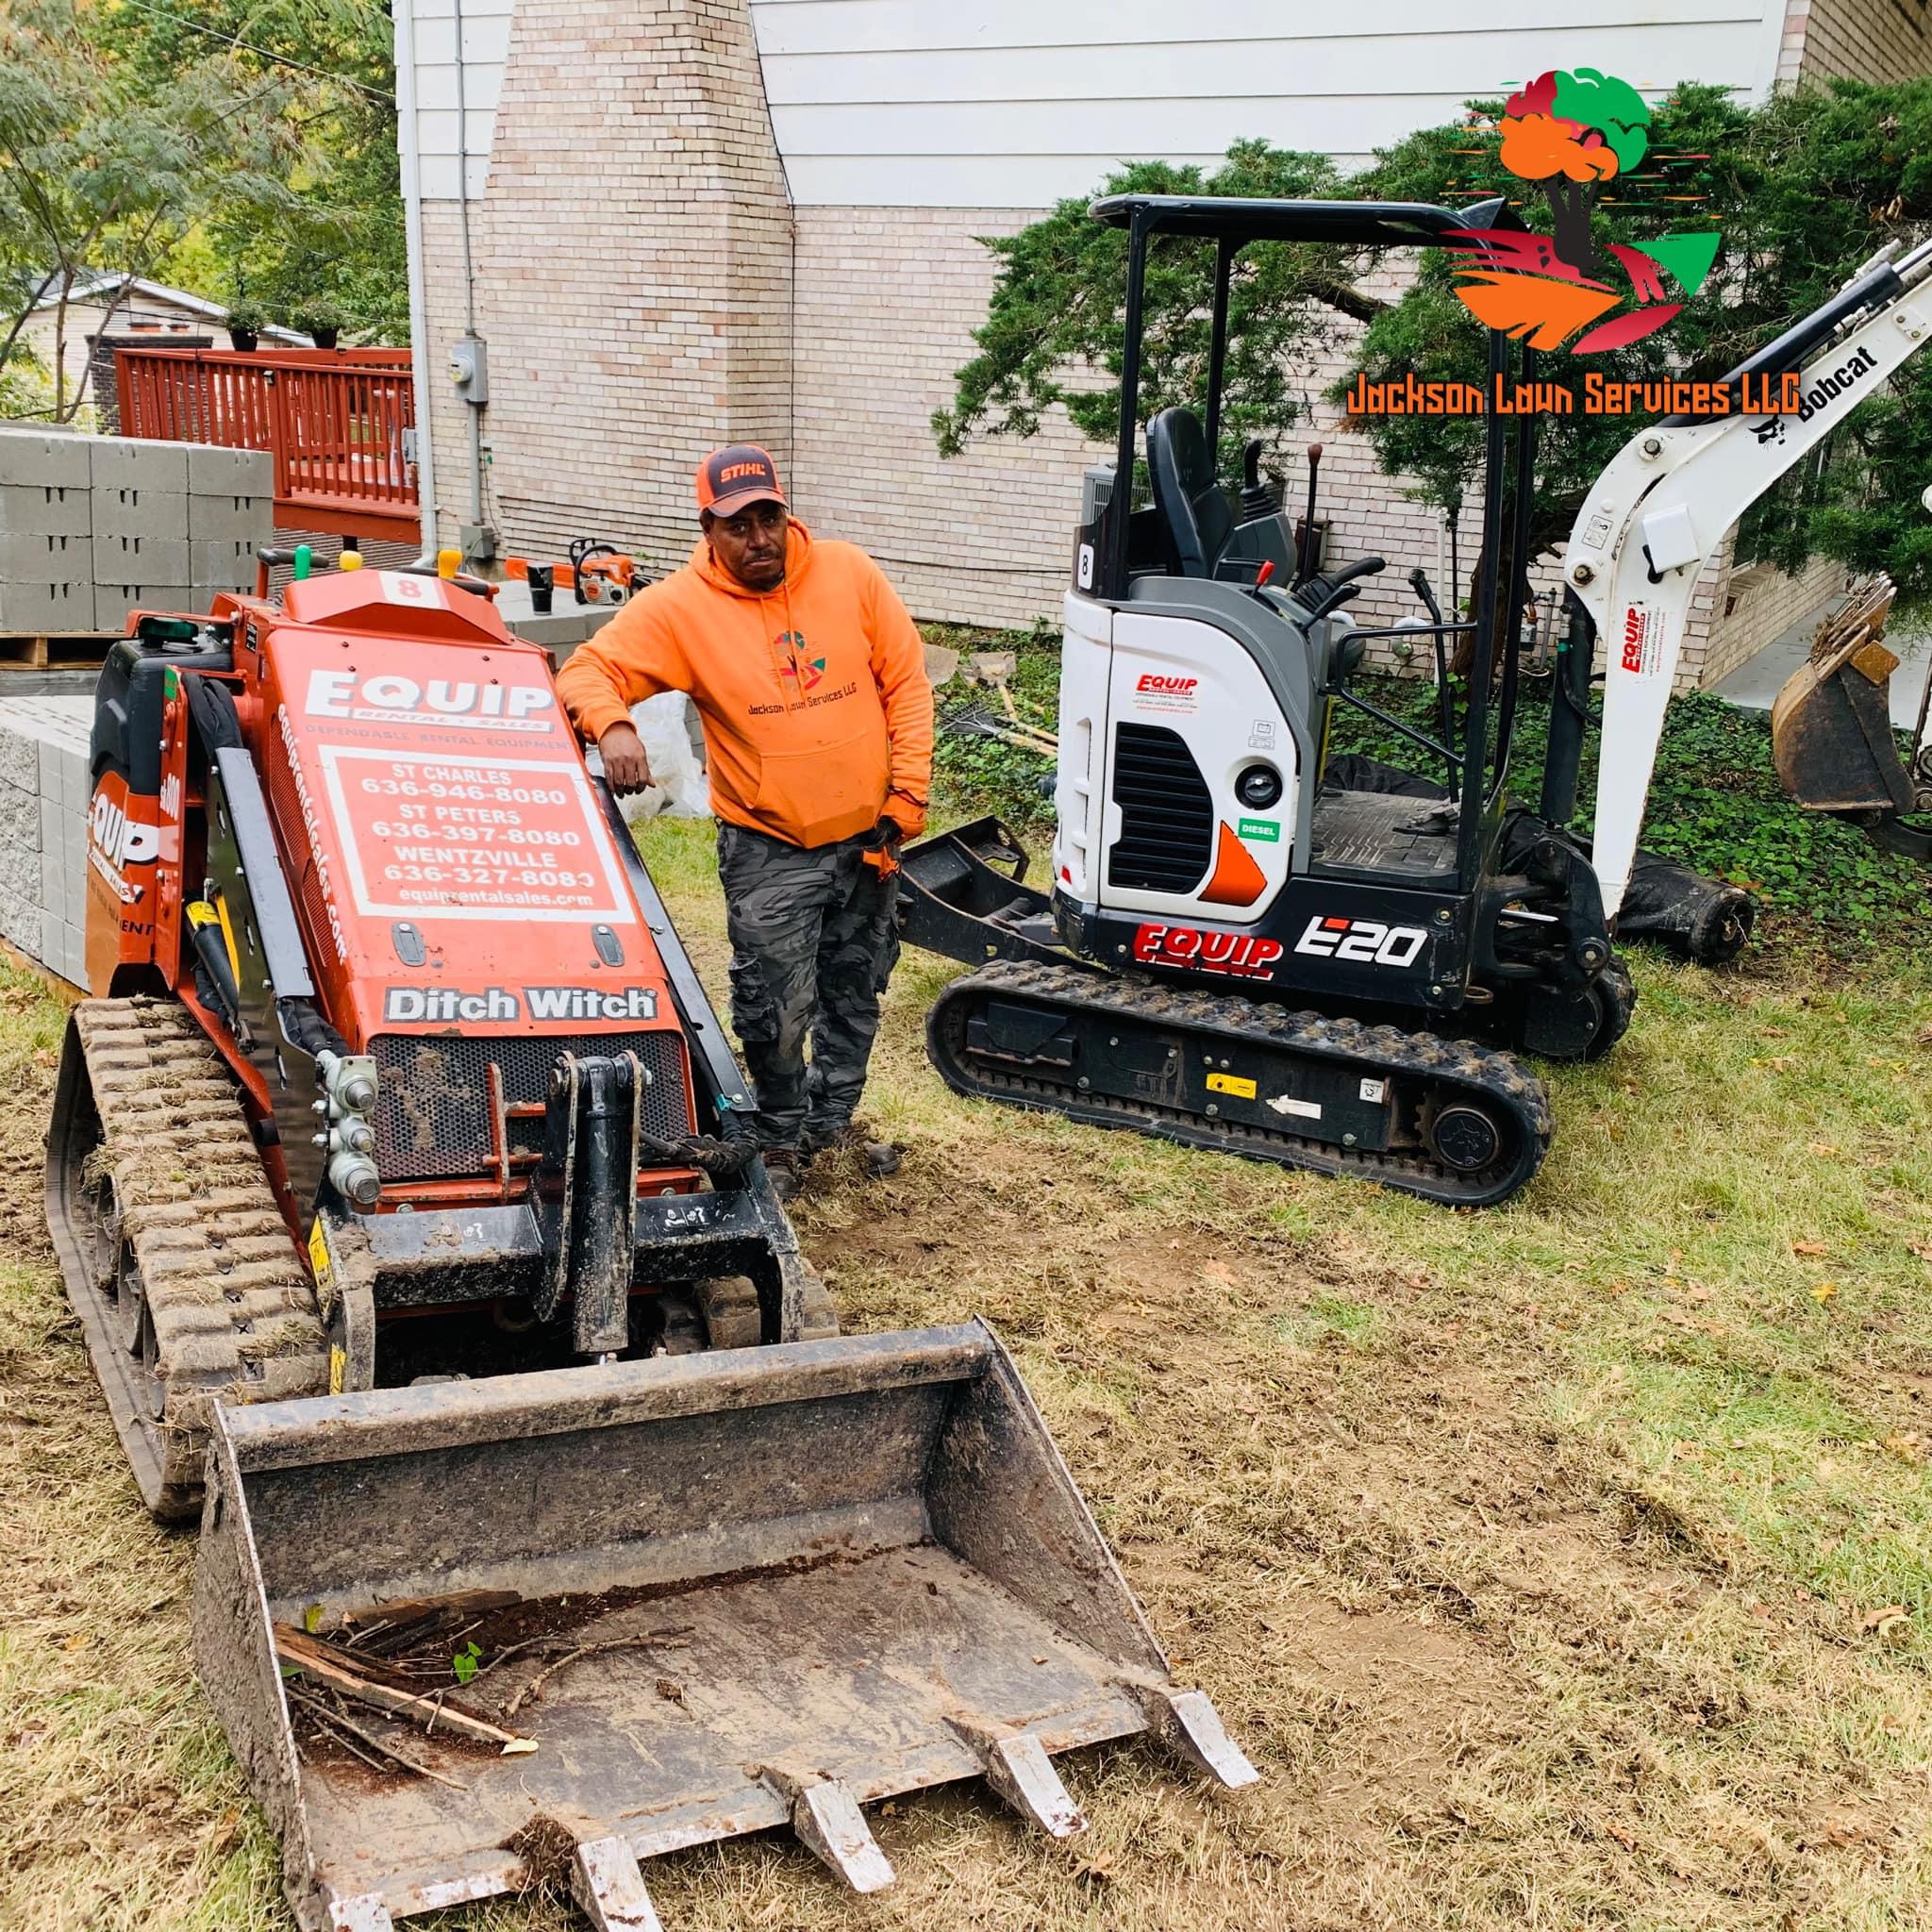 Lawn Maintenance & Landscaping company Jackson Lawn Services LLC in Florissant, MO